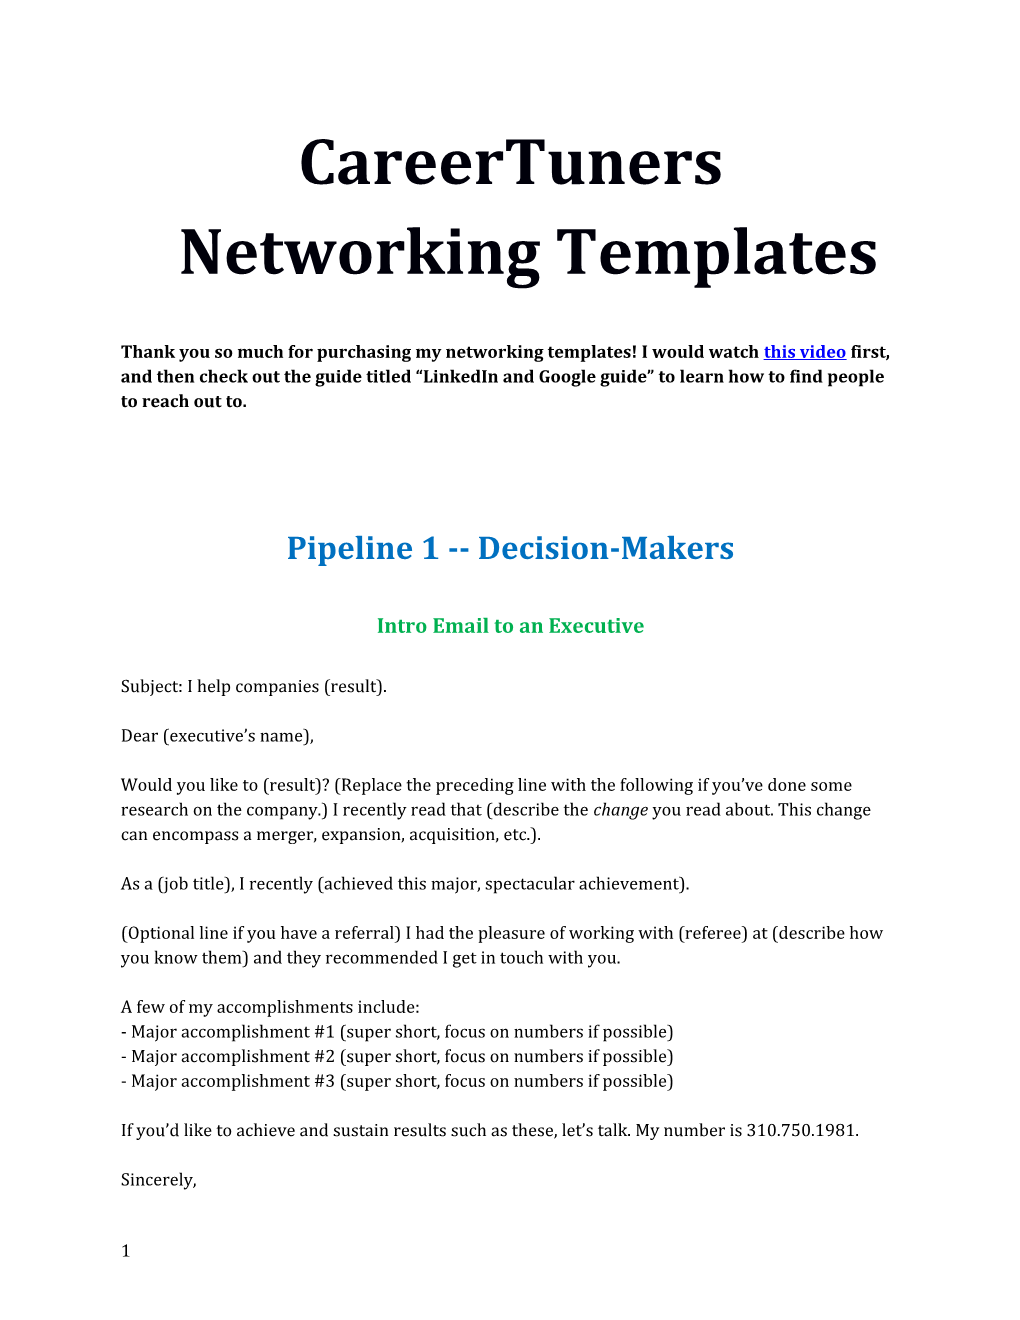 Careertuners Networking Templates